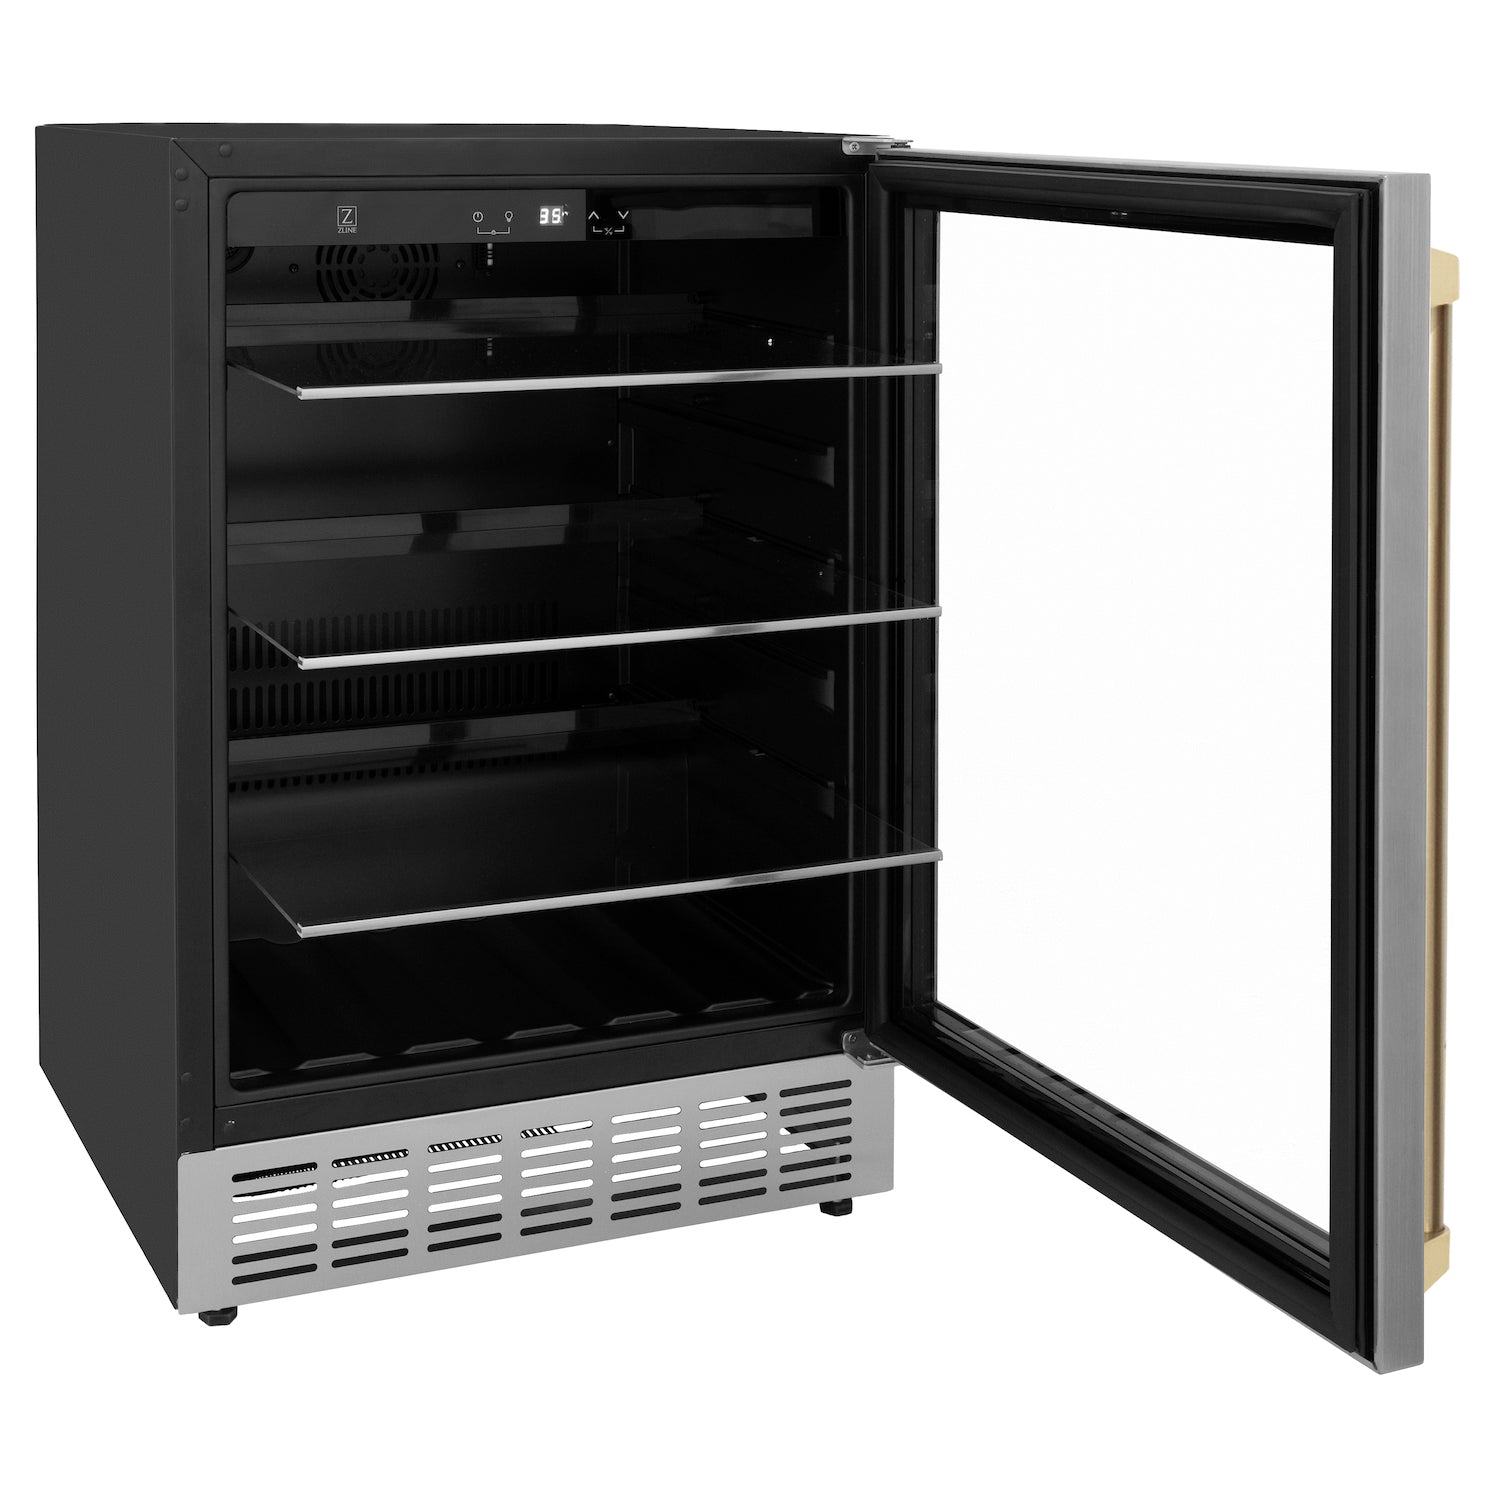 ZLINE Autograph Edition 24" Beverage Fridge with Champagne Bronze handle side with door open and adjustable glass shelves extended.